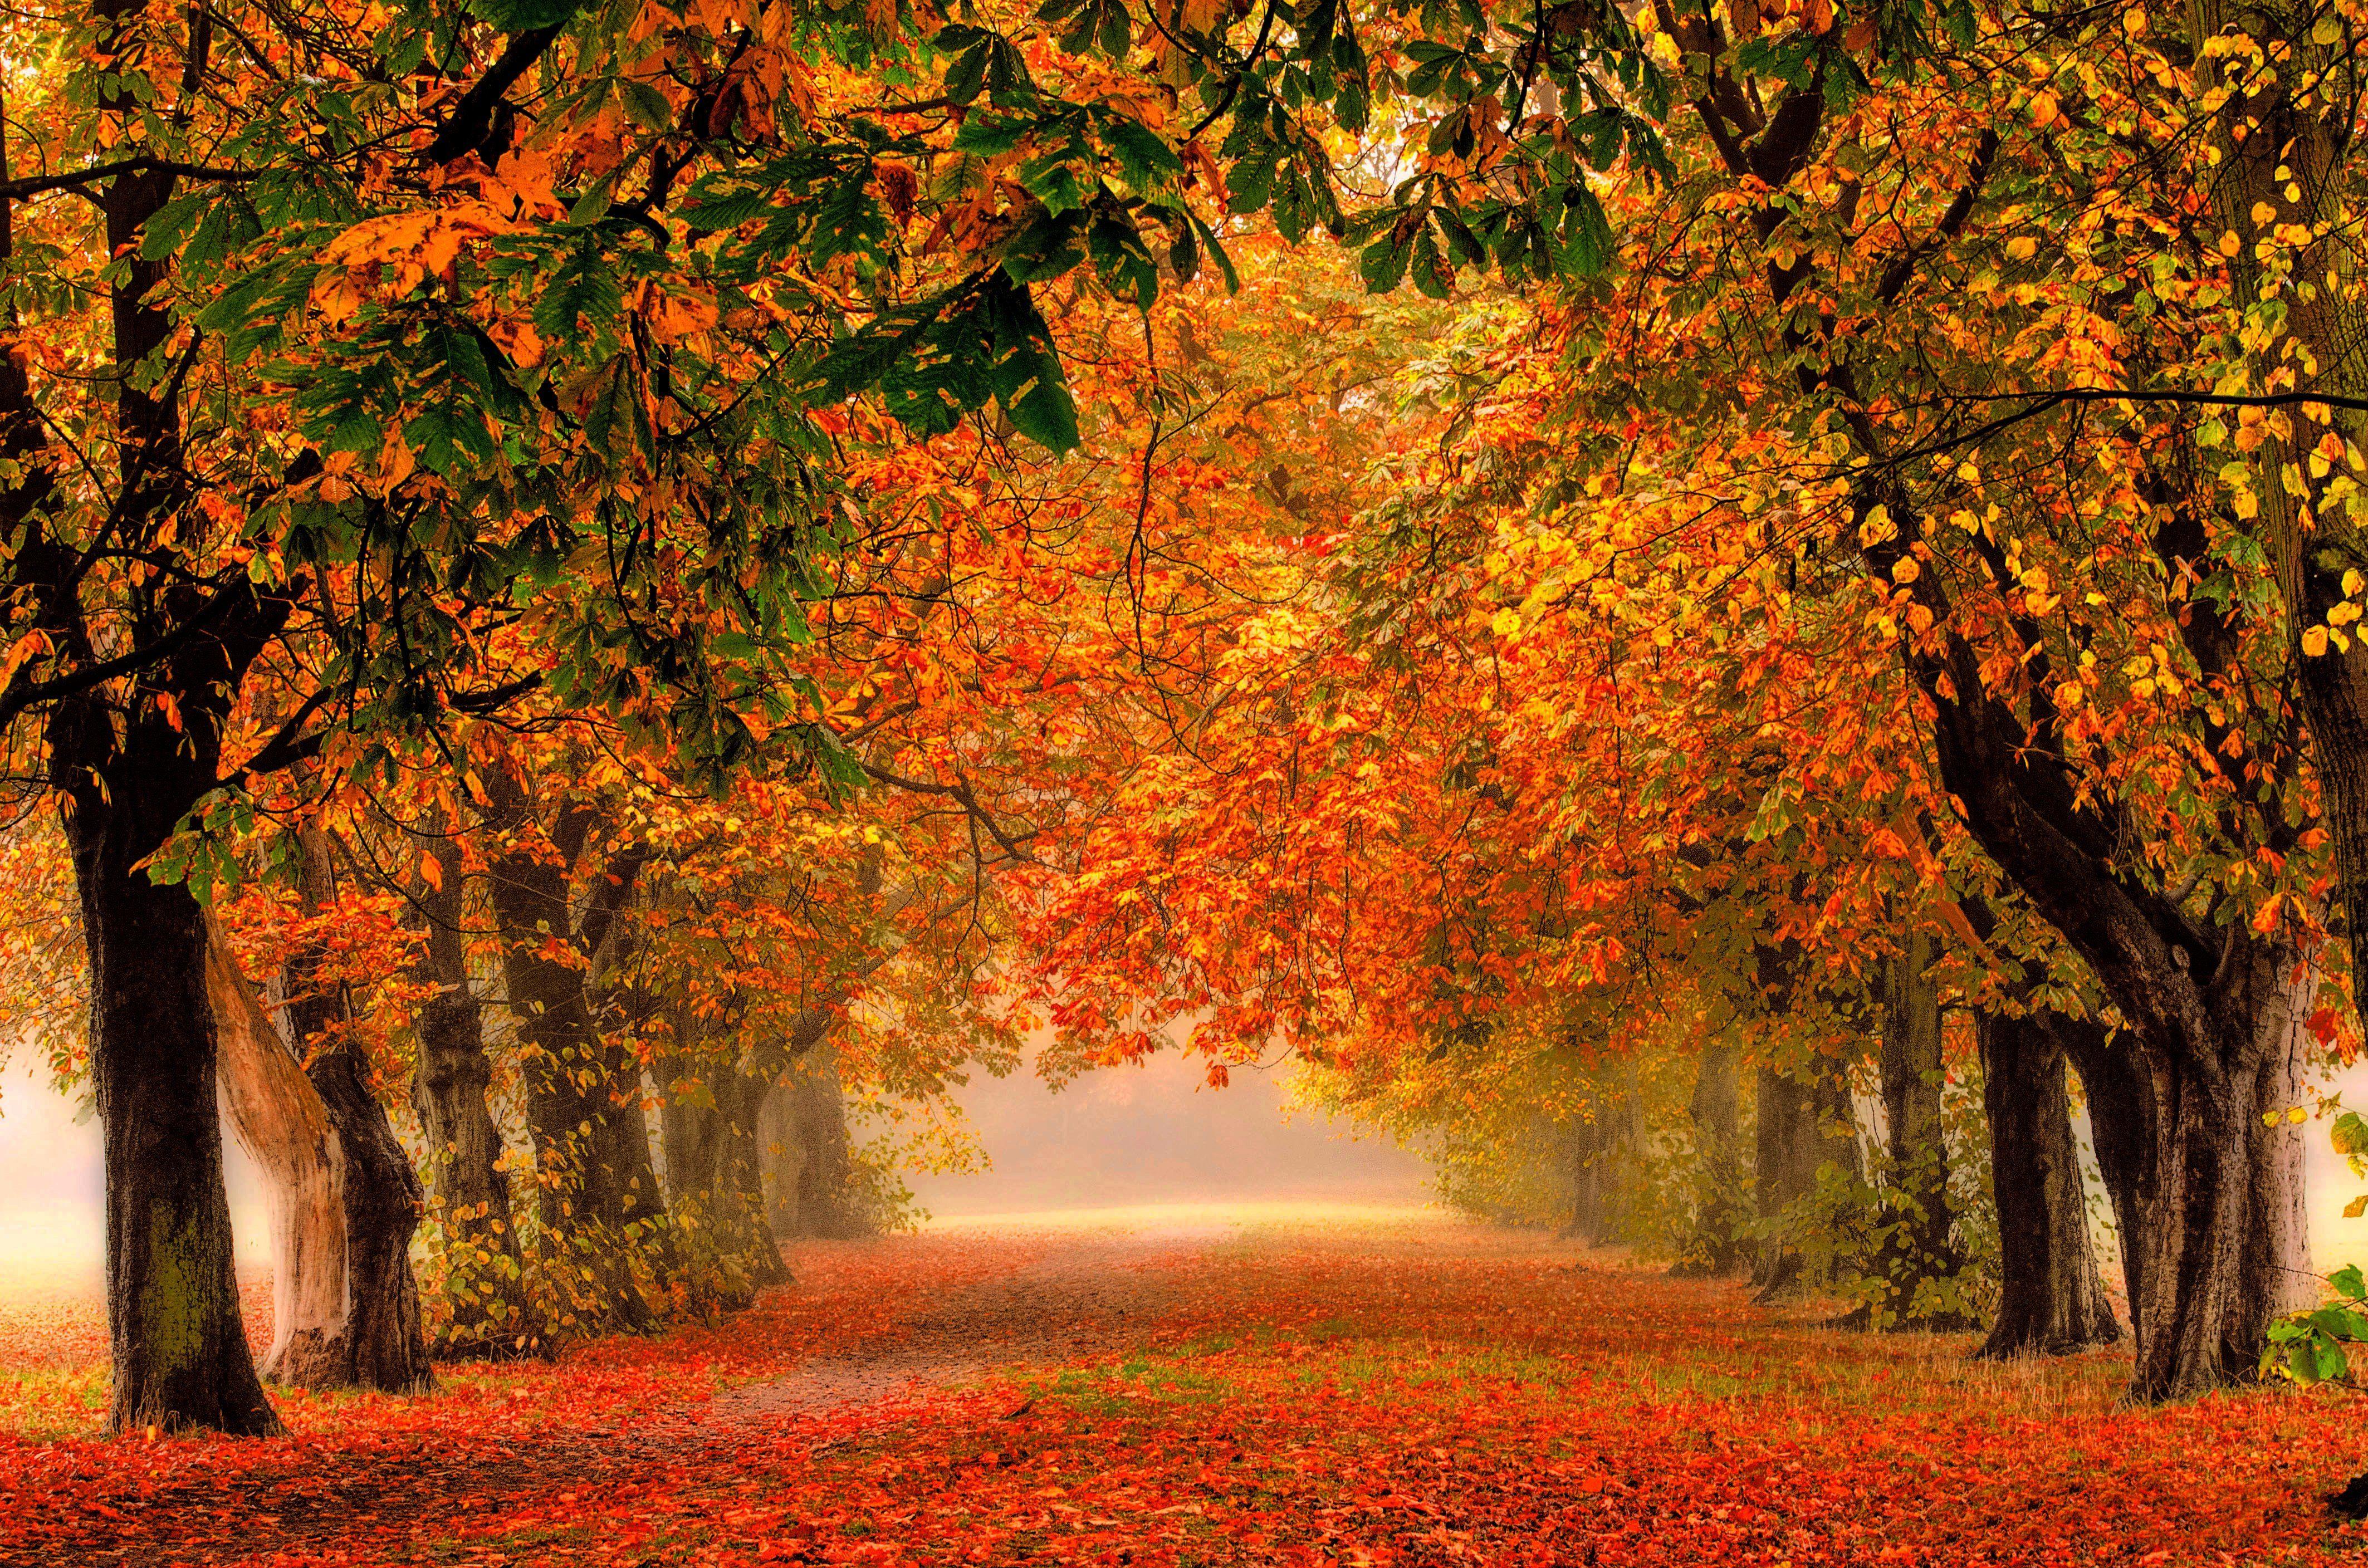 Image result for autumn forest path wallpaper. Autumn landscape, Poster picture, Nature